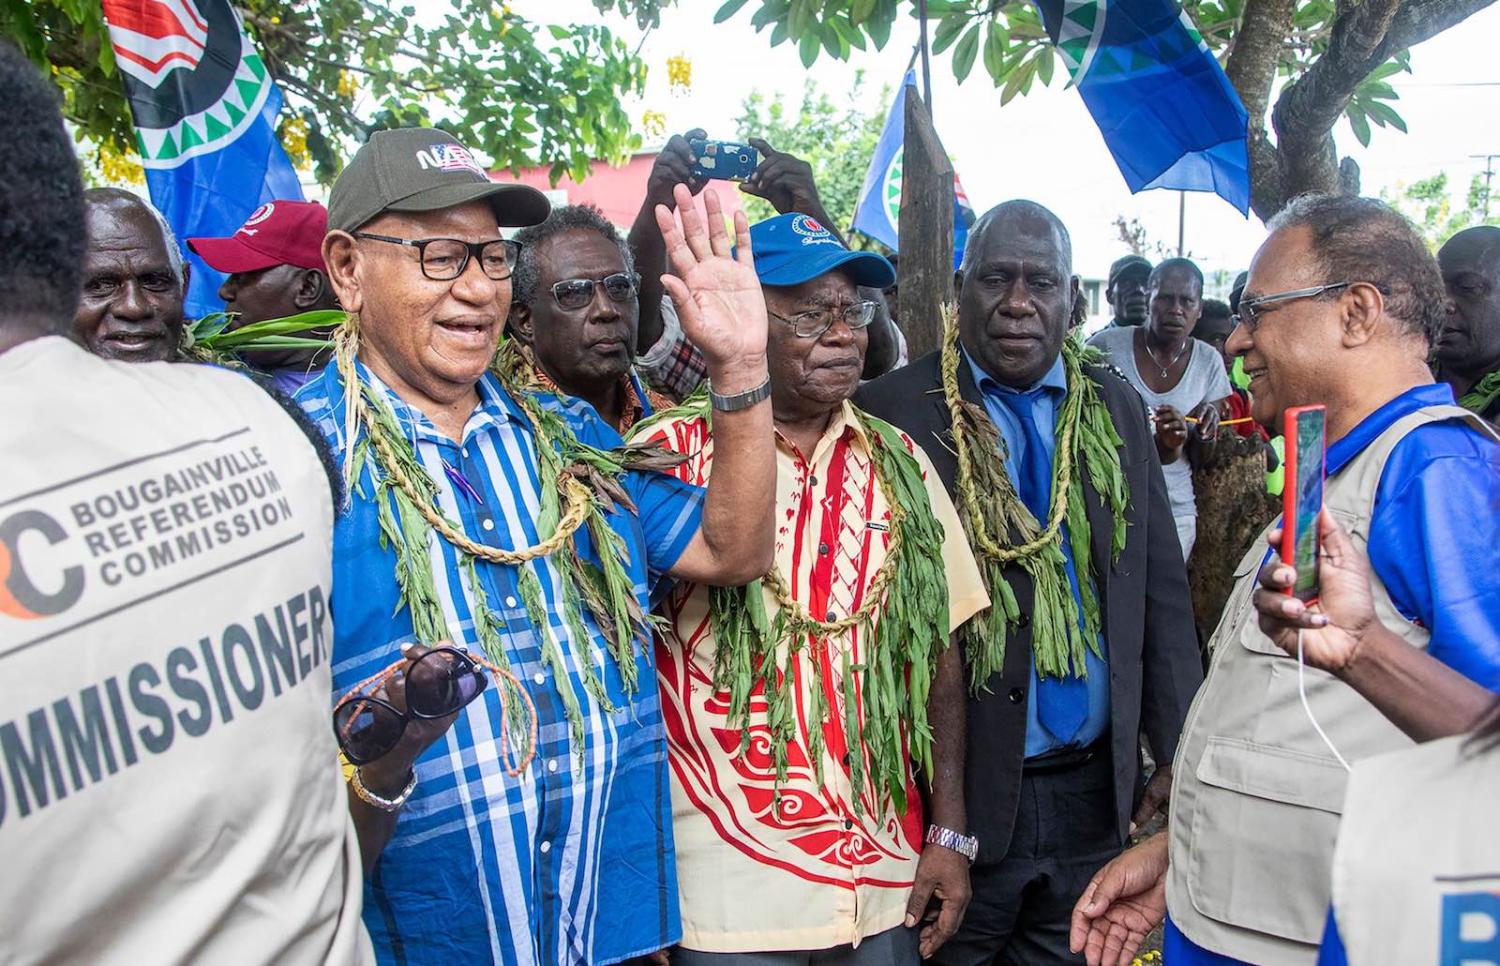 John Momis waves for the camera when about to cast a ballot in Bougainville’s independence vote in Buka on 23 November 2019 (Ness Kerton/AFP/Getty Images)